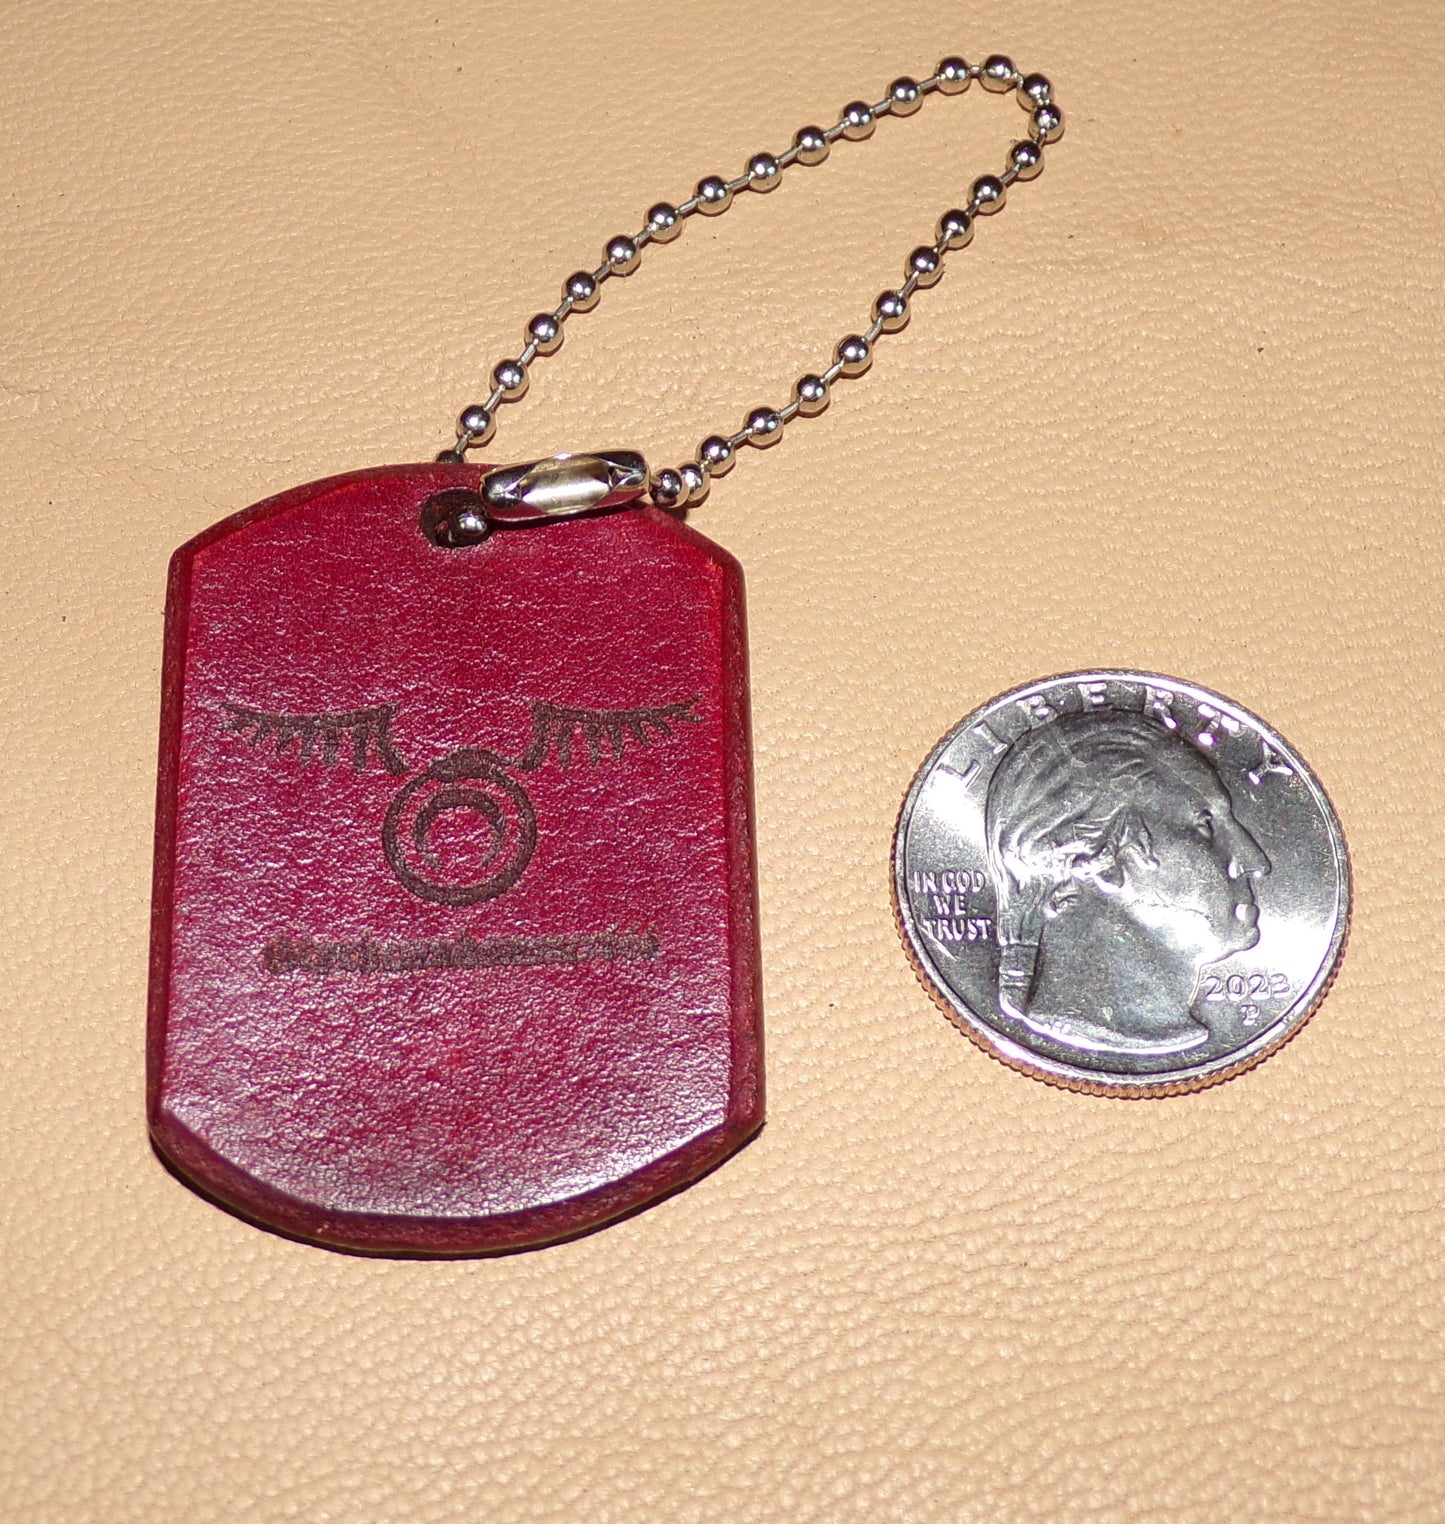 Styx Dog Tag Keychain Brick Red leather medium w/Ouroboros with wings